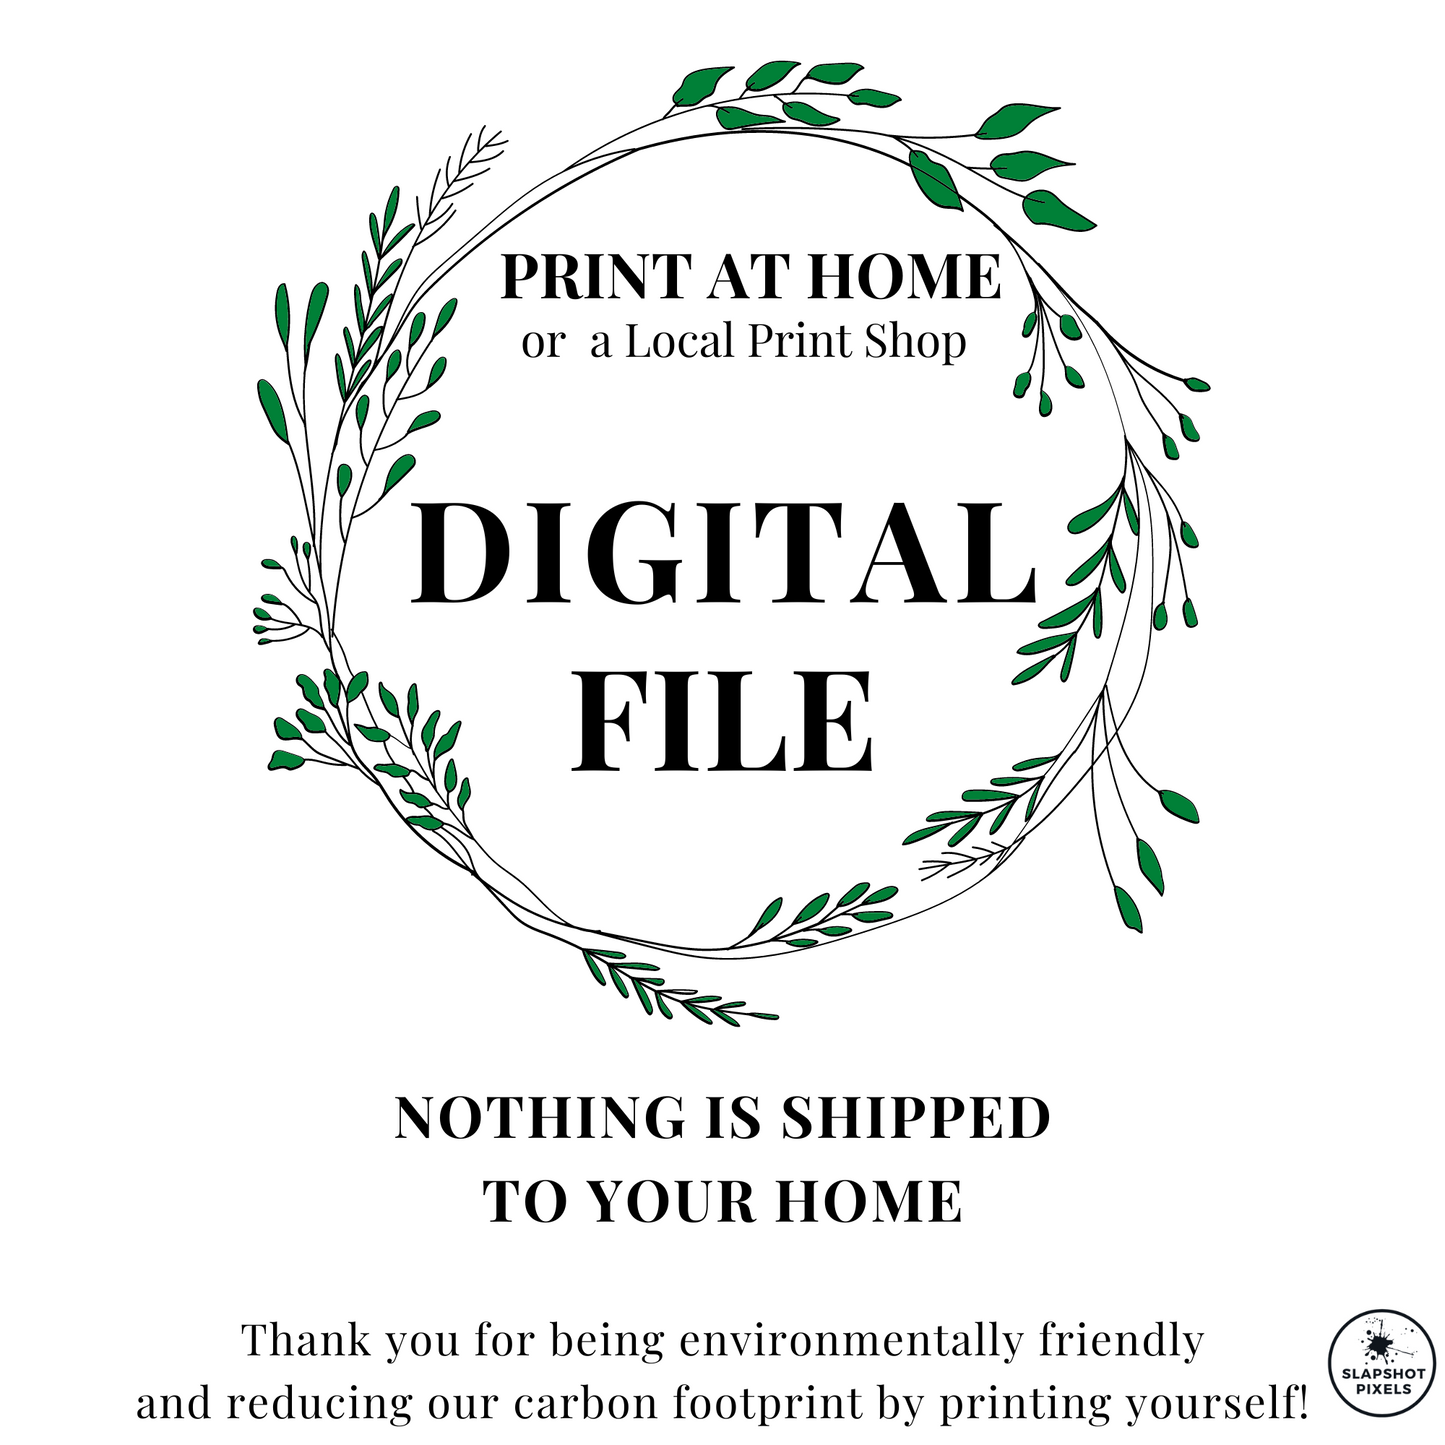 This is a digital file that you will print.